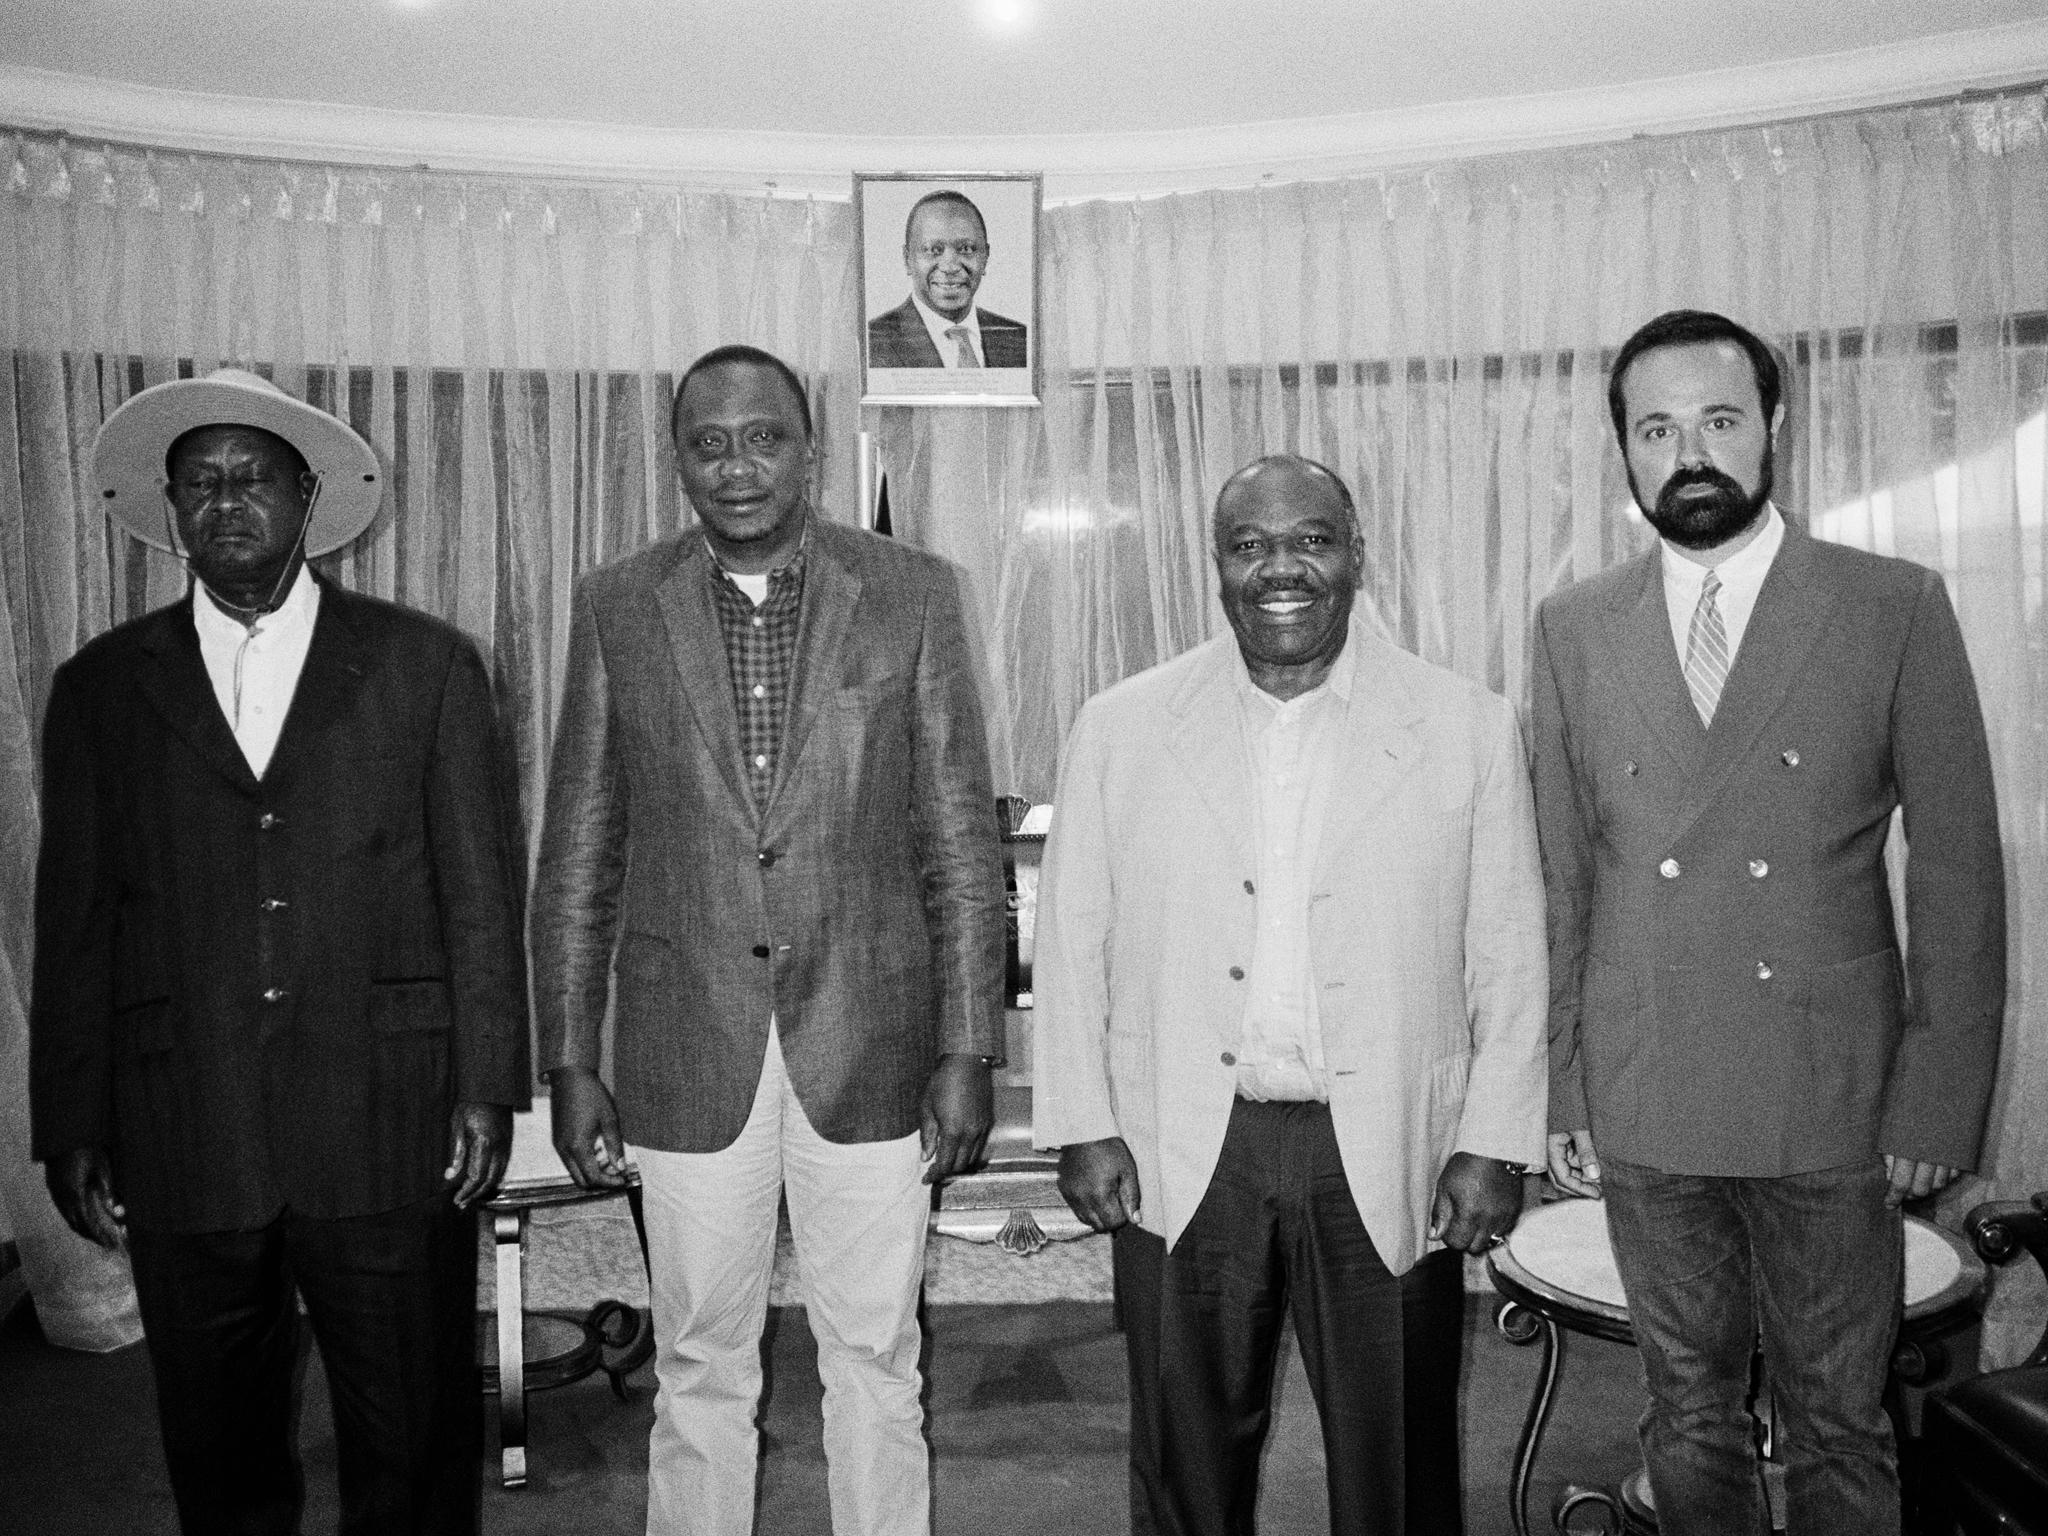 Evgeny Lebedev, the owner of the Evening Standard newspaper and independent.co.uk, is the patron of the Giants Club. Here he is with (from left) President Museveni of Uganda, President Kenyatta of Kenya and President Bongo of Gabon.